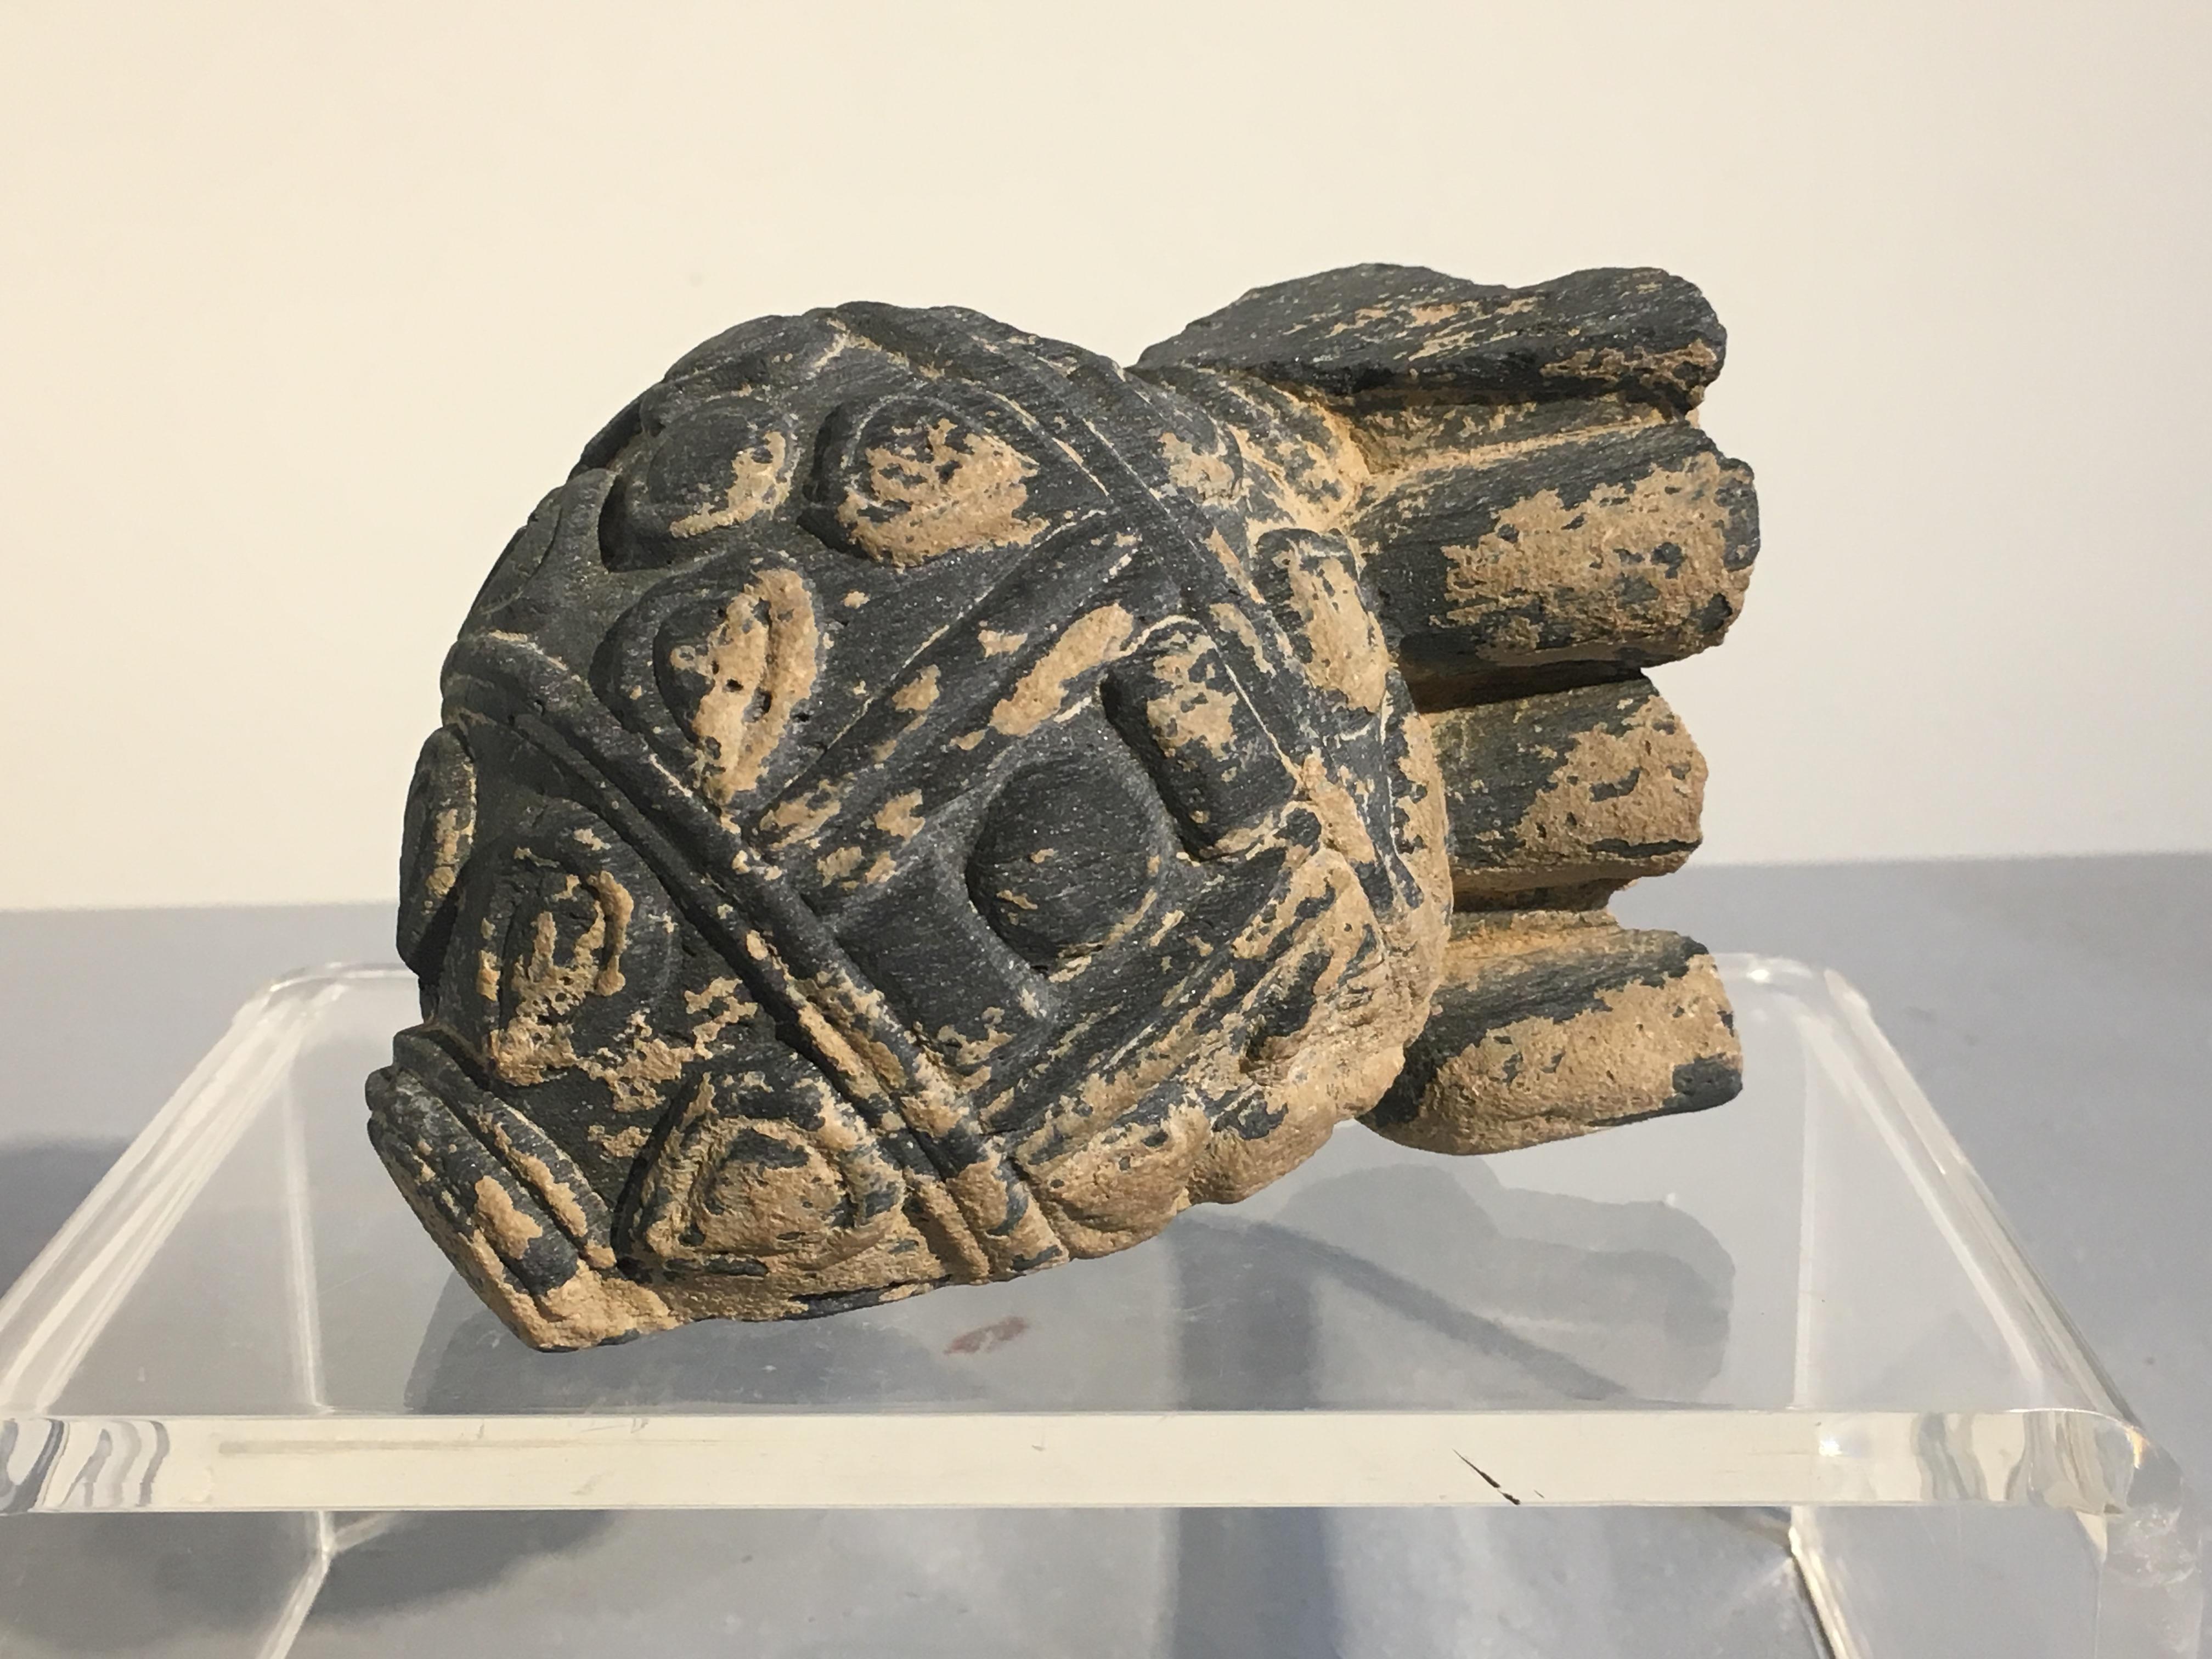 18th Century and Earlier Group of Gandharan Carved Schist Sculptural Fragments, 3rd-5th Century